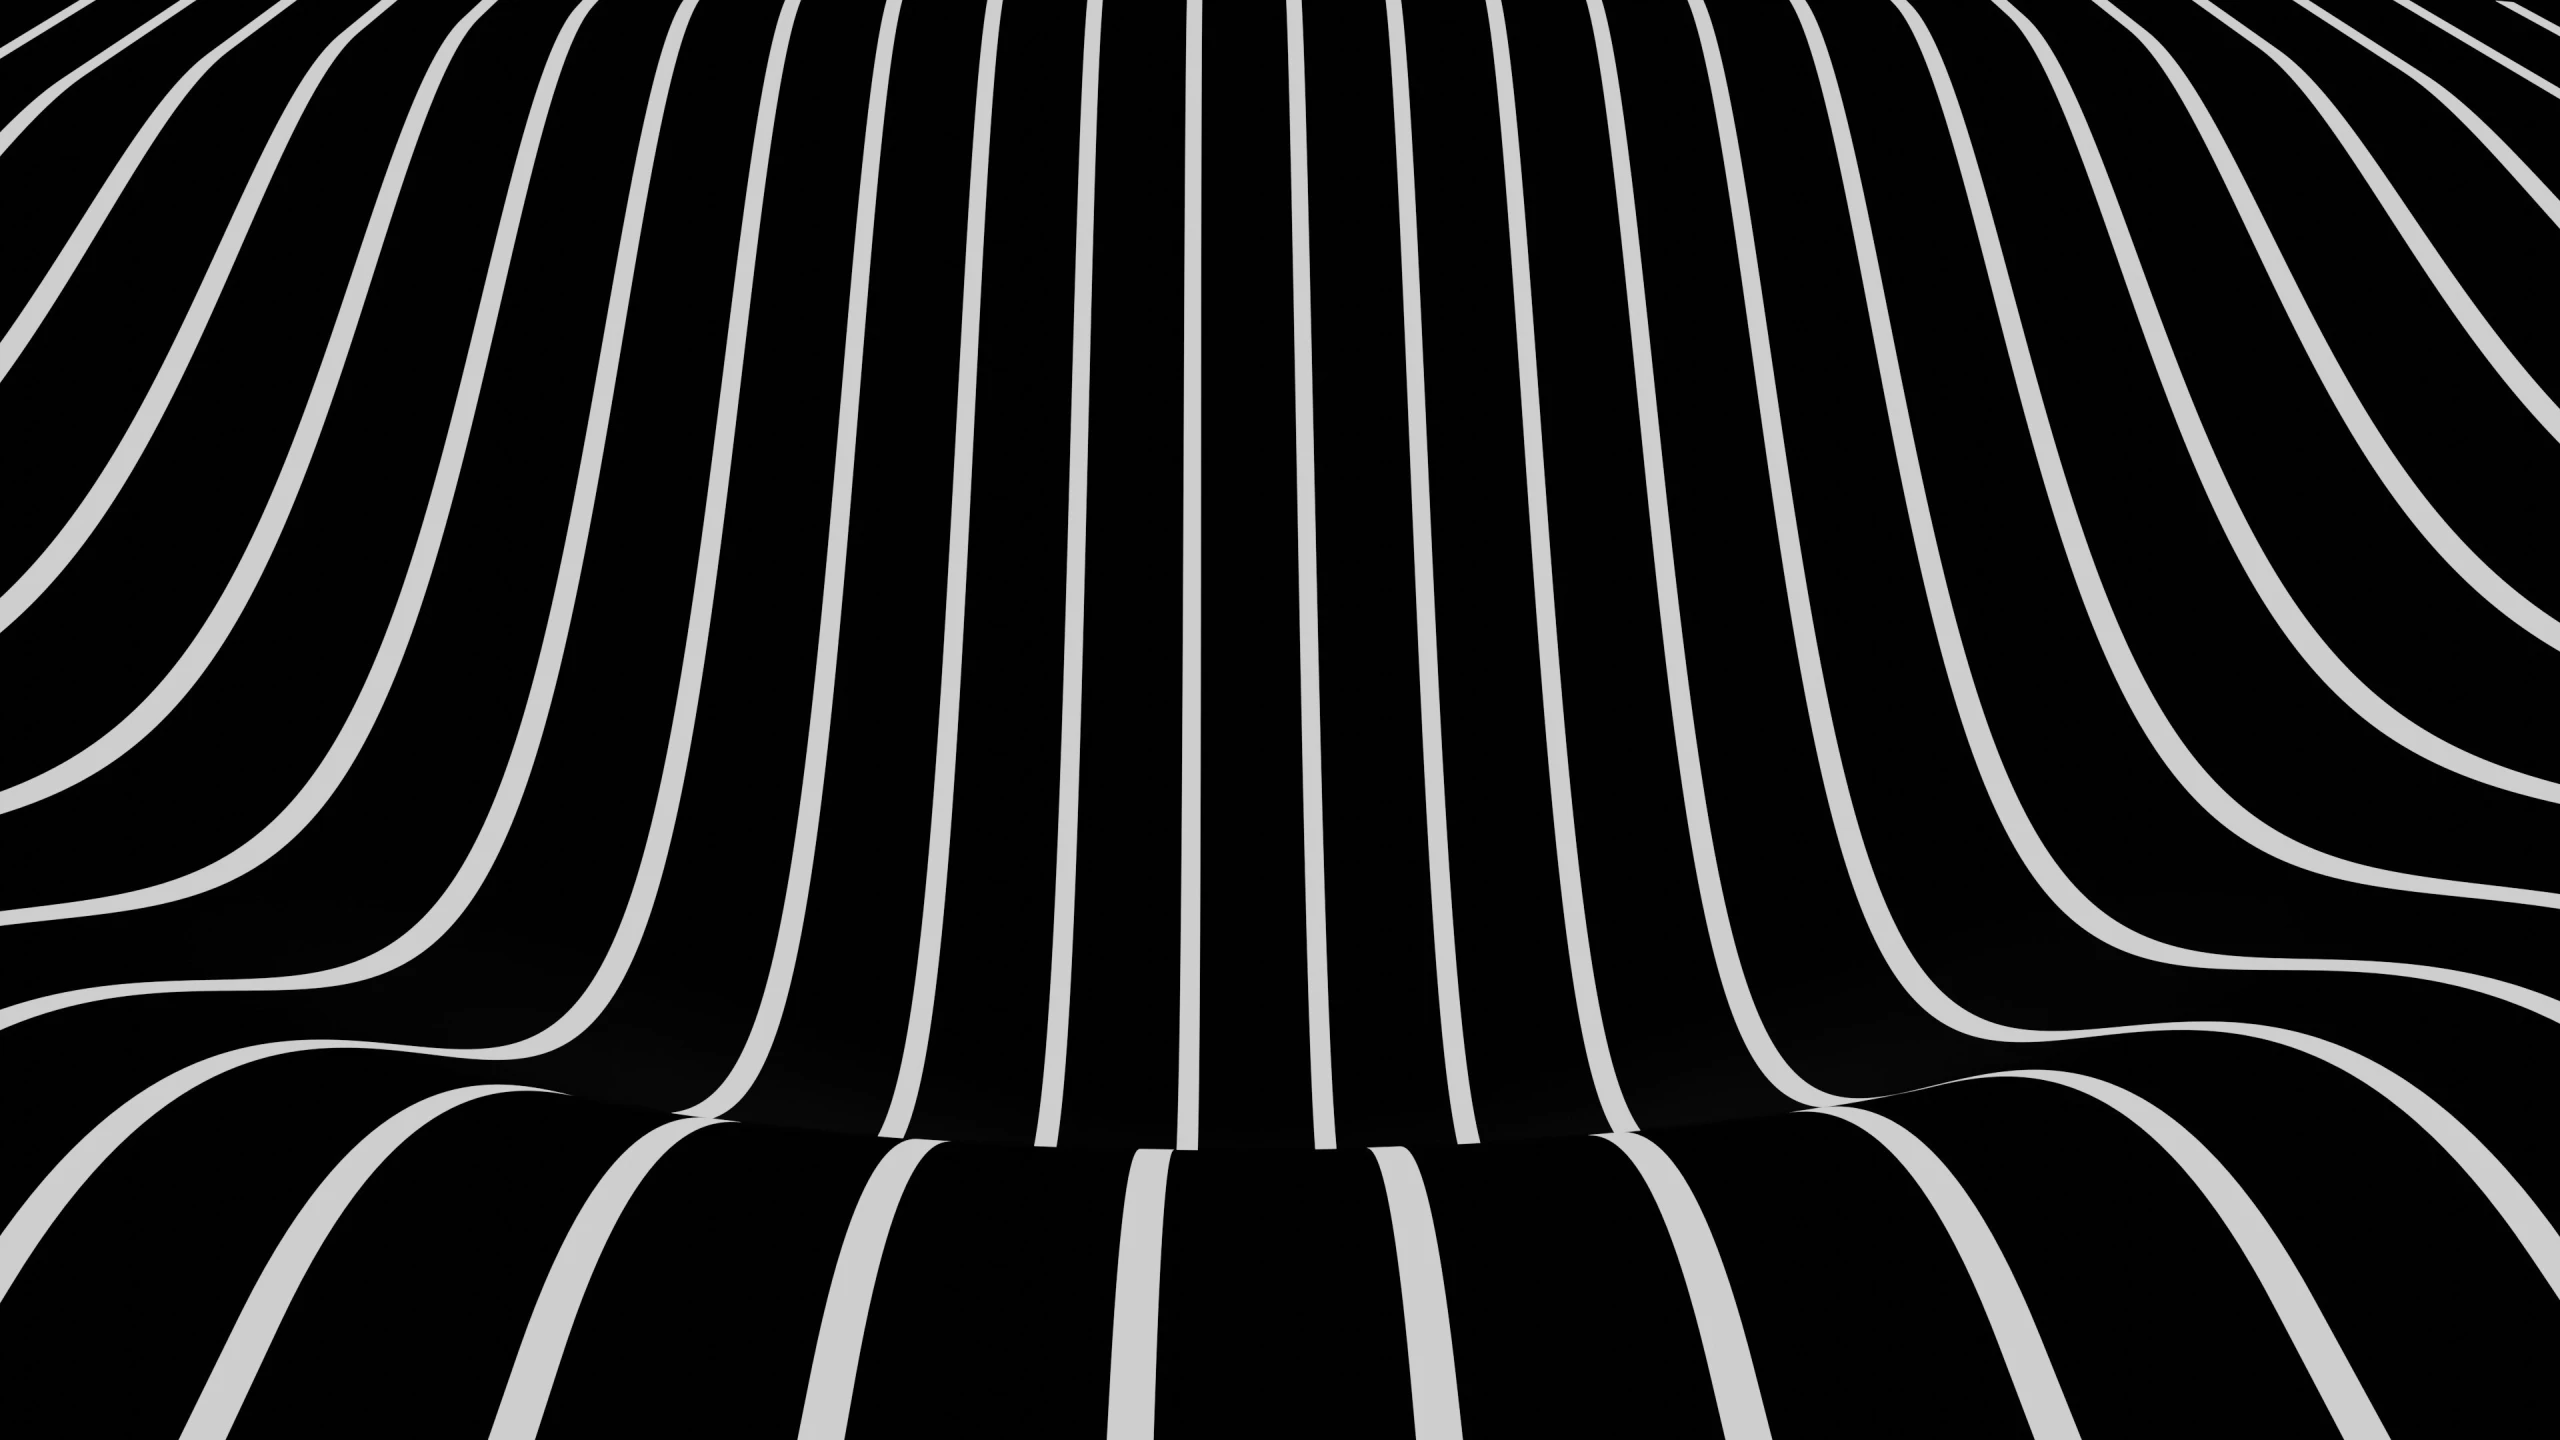 black and white art form image in striped material